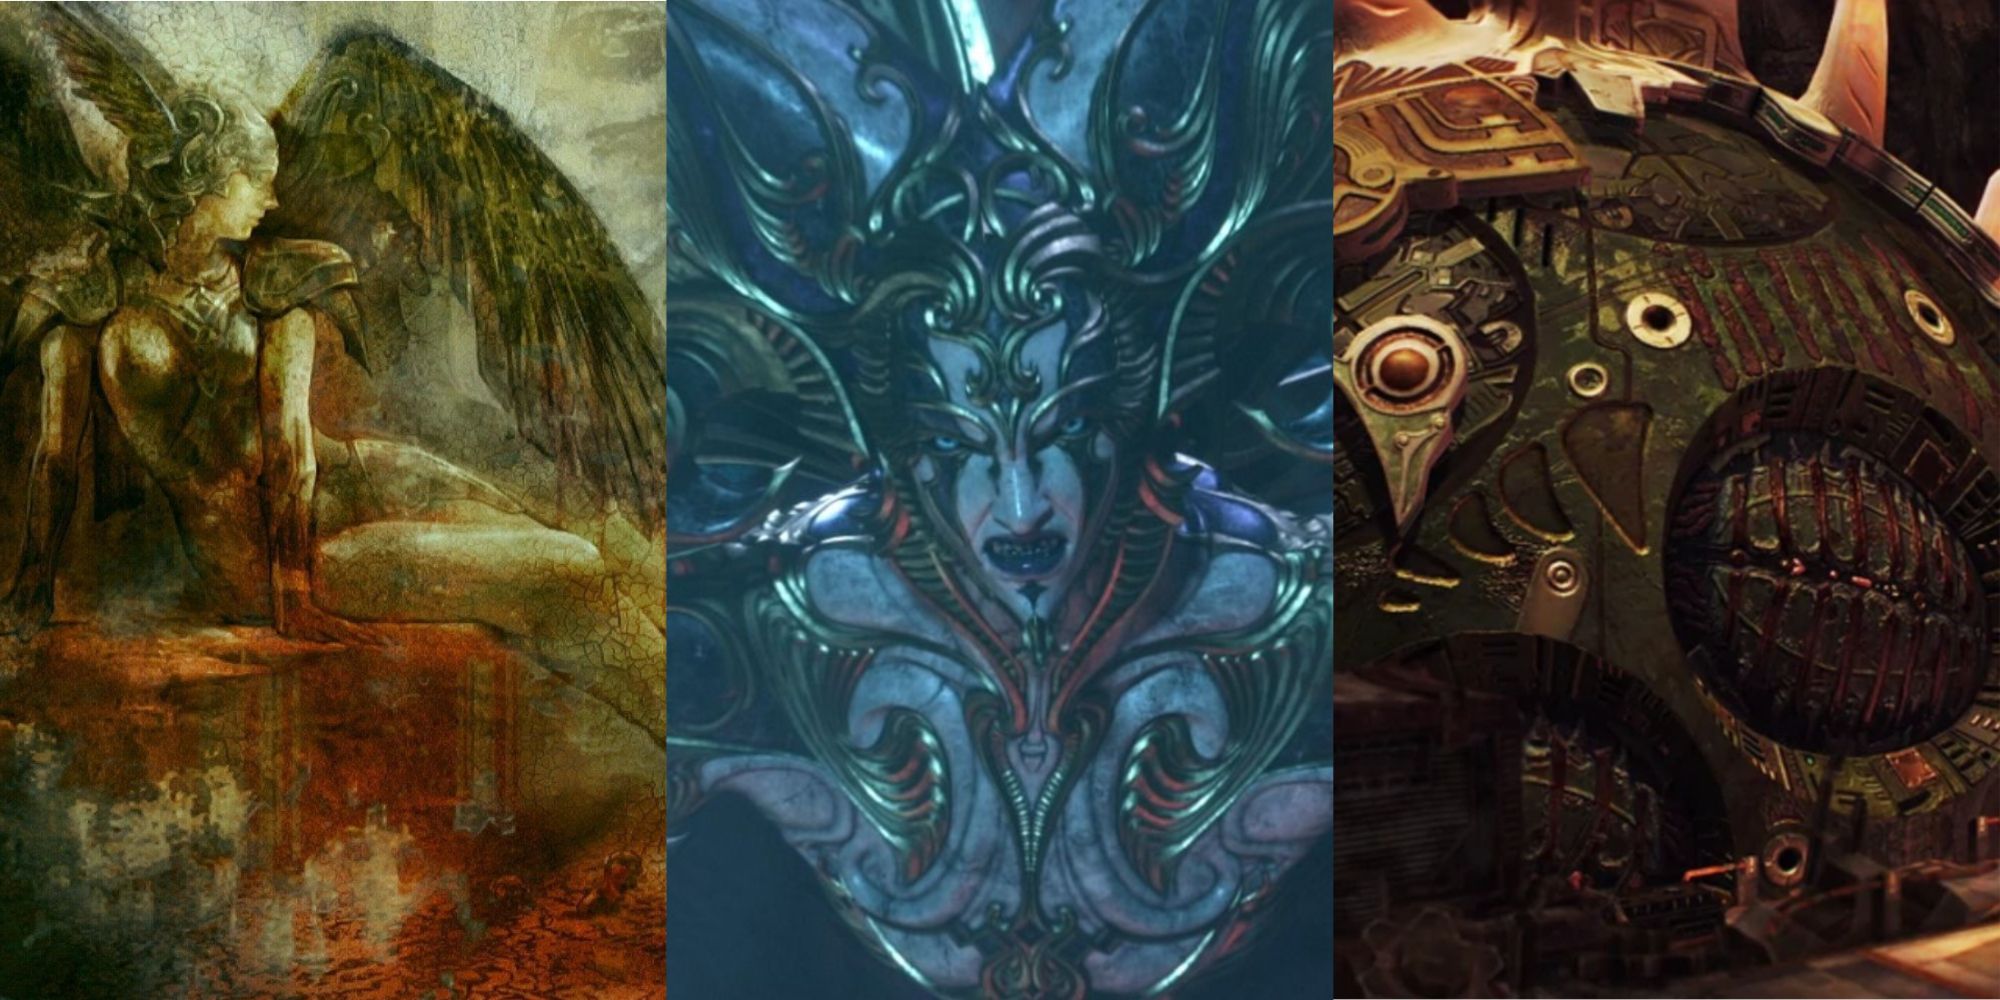 Final Fantasy 13: Mural of Etro bleeding, Bhunivelze scowling, and the Fal'Cie Atomos, left to right